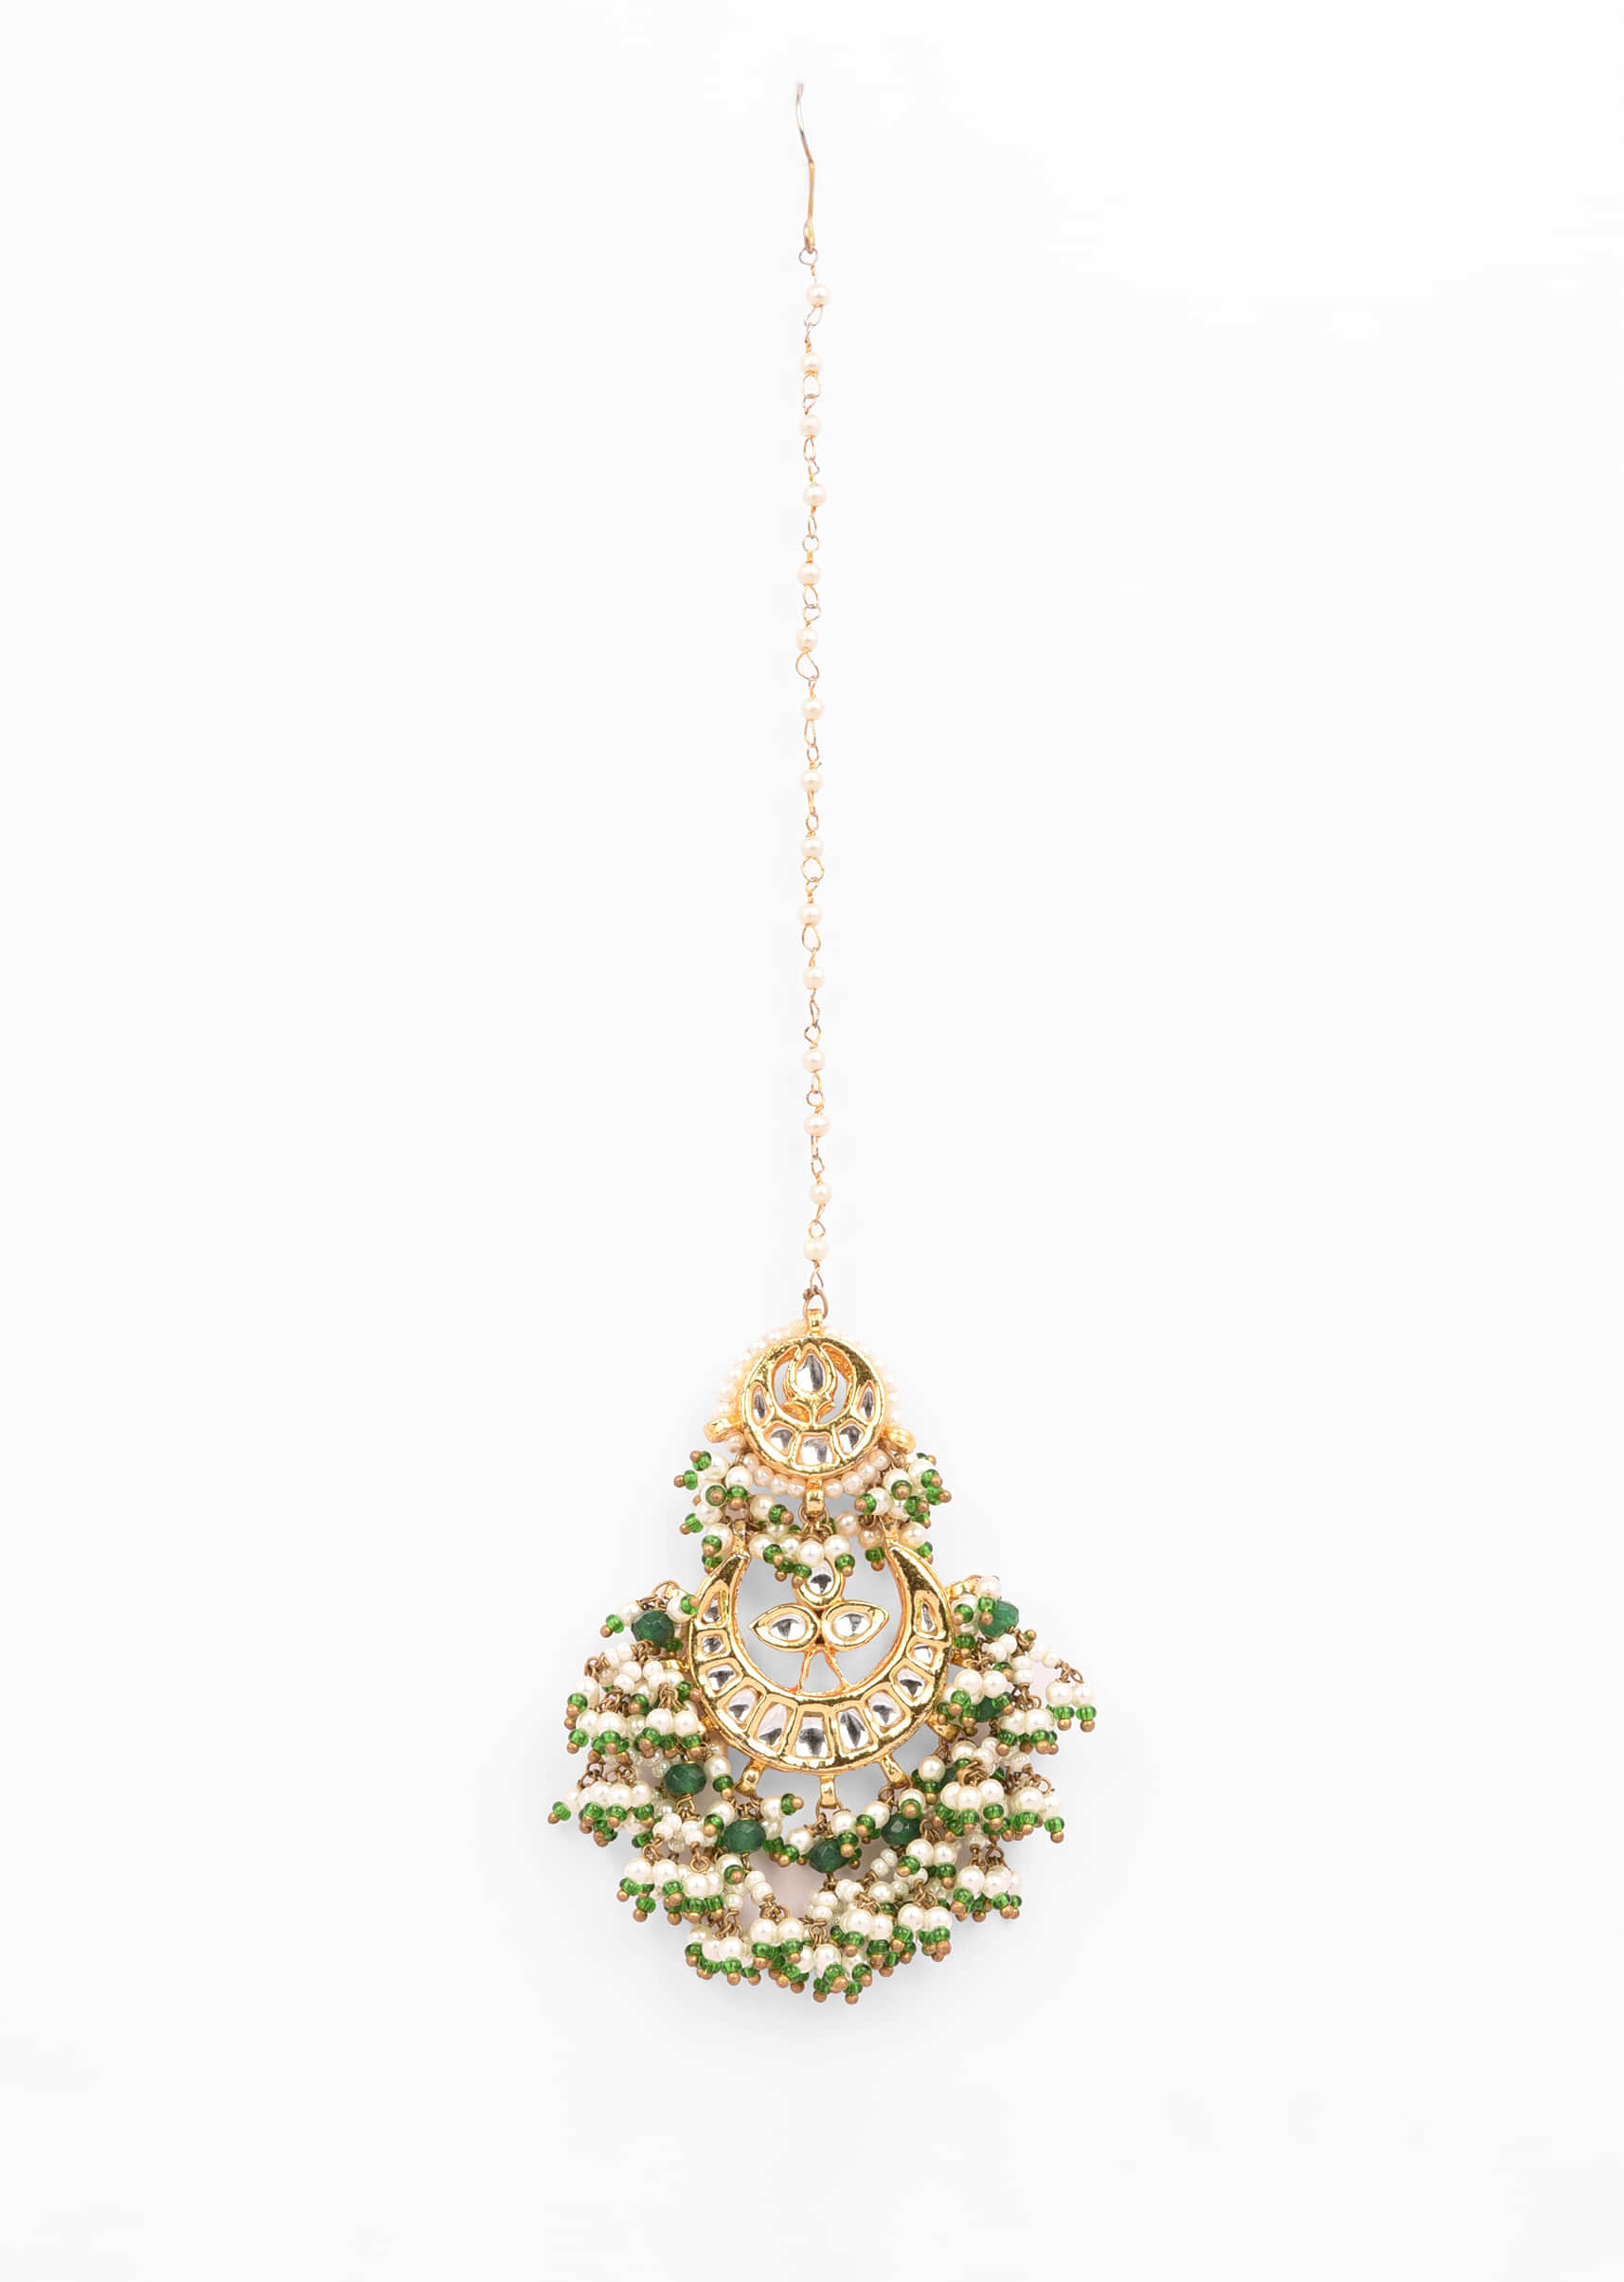 Gold Plated Mangtika With Crescent Polki, Bunches Of Green Beads And Pearls 